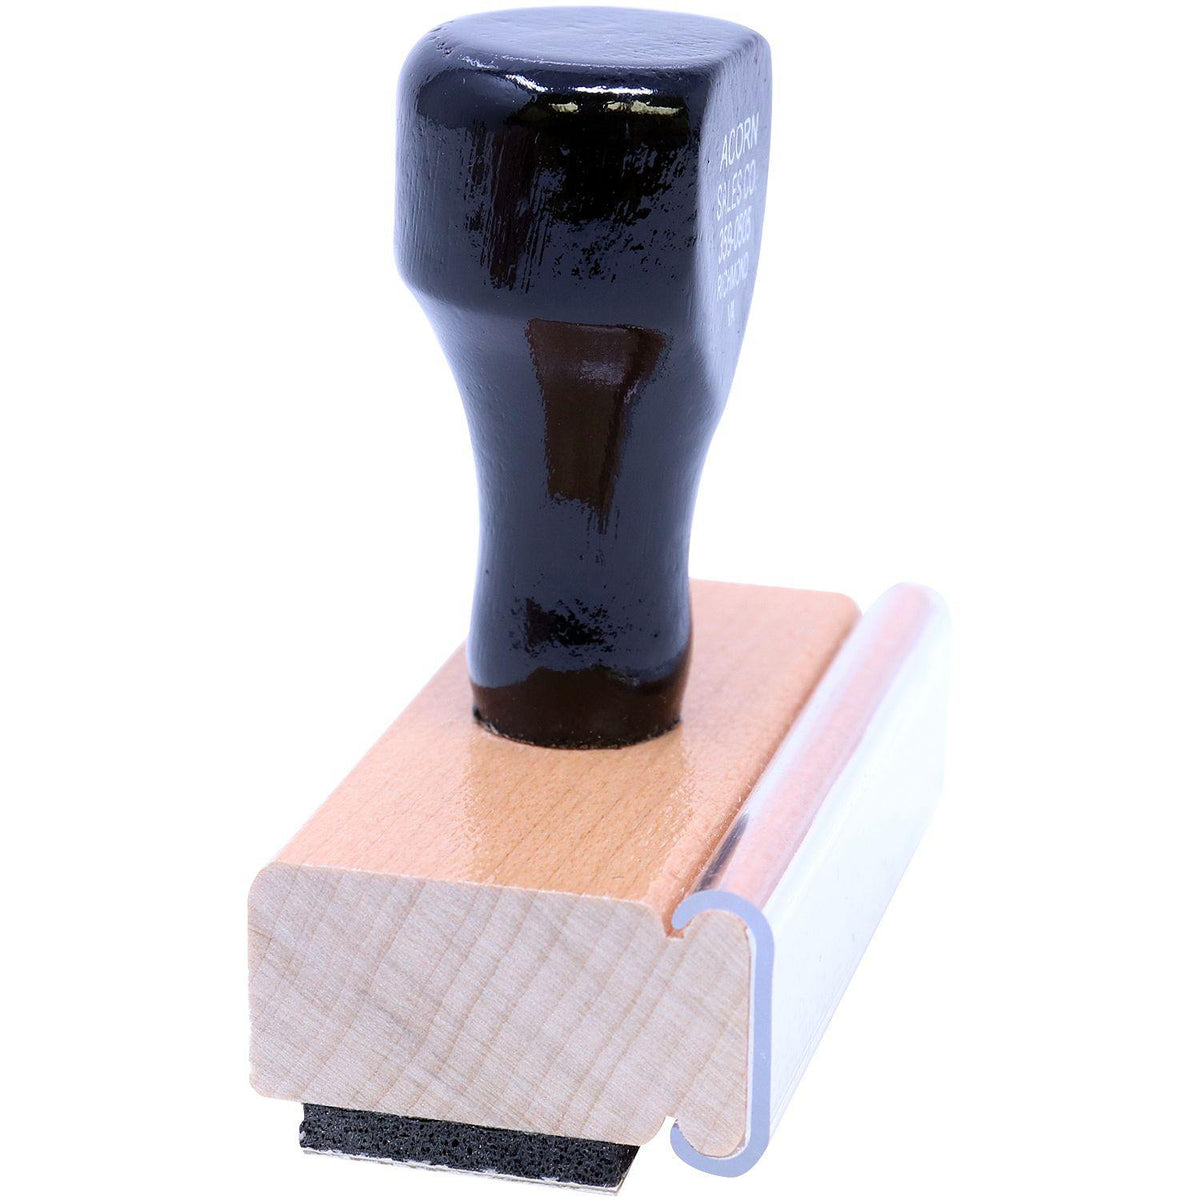 Side View of Large Paid with Dollar Sign Rubber Stamp at an Angle